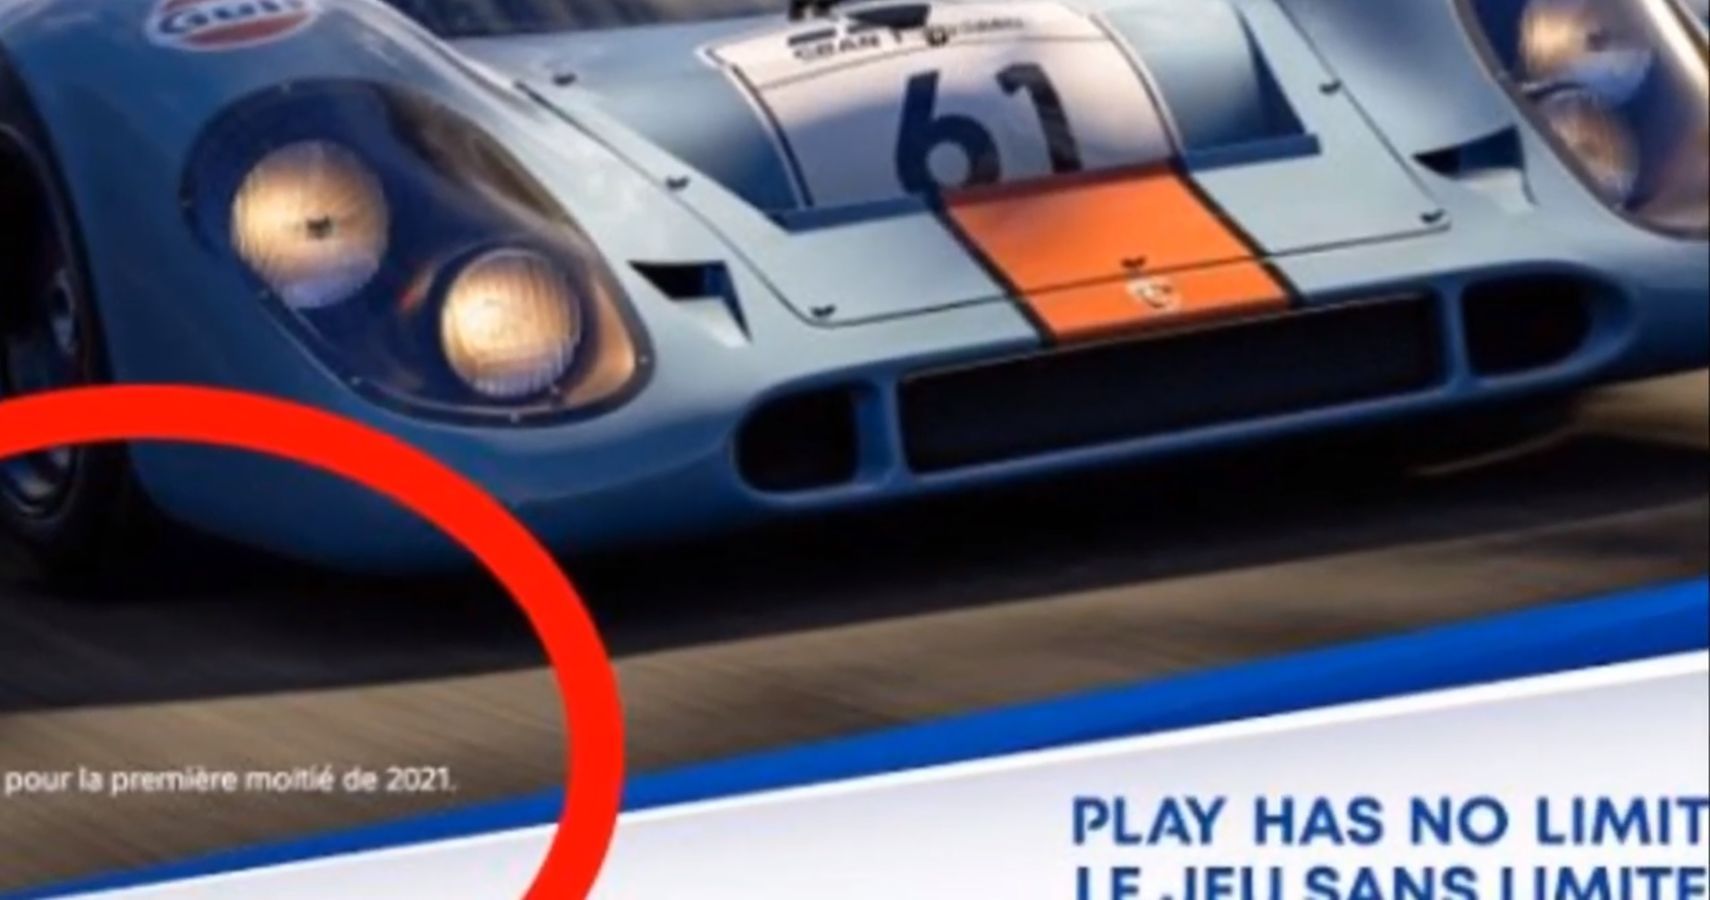 Gran Turismo 7 Releasing In First Half Of 21 According To Latest Playstation Ad